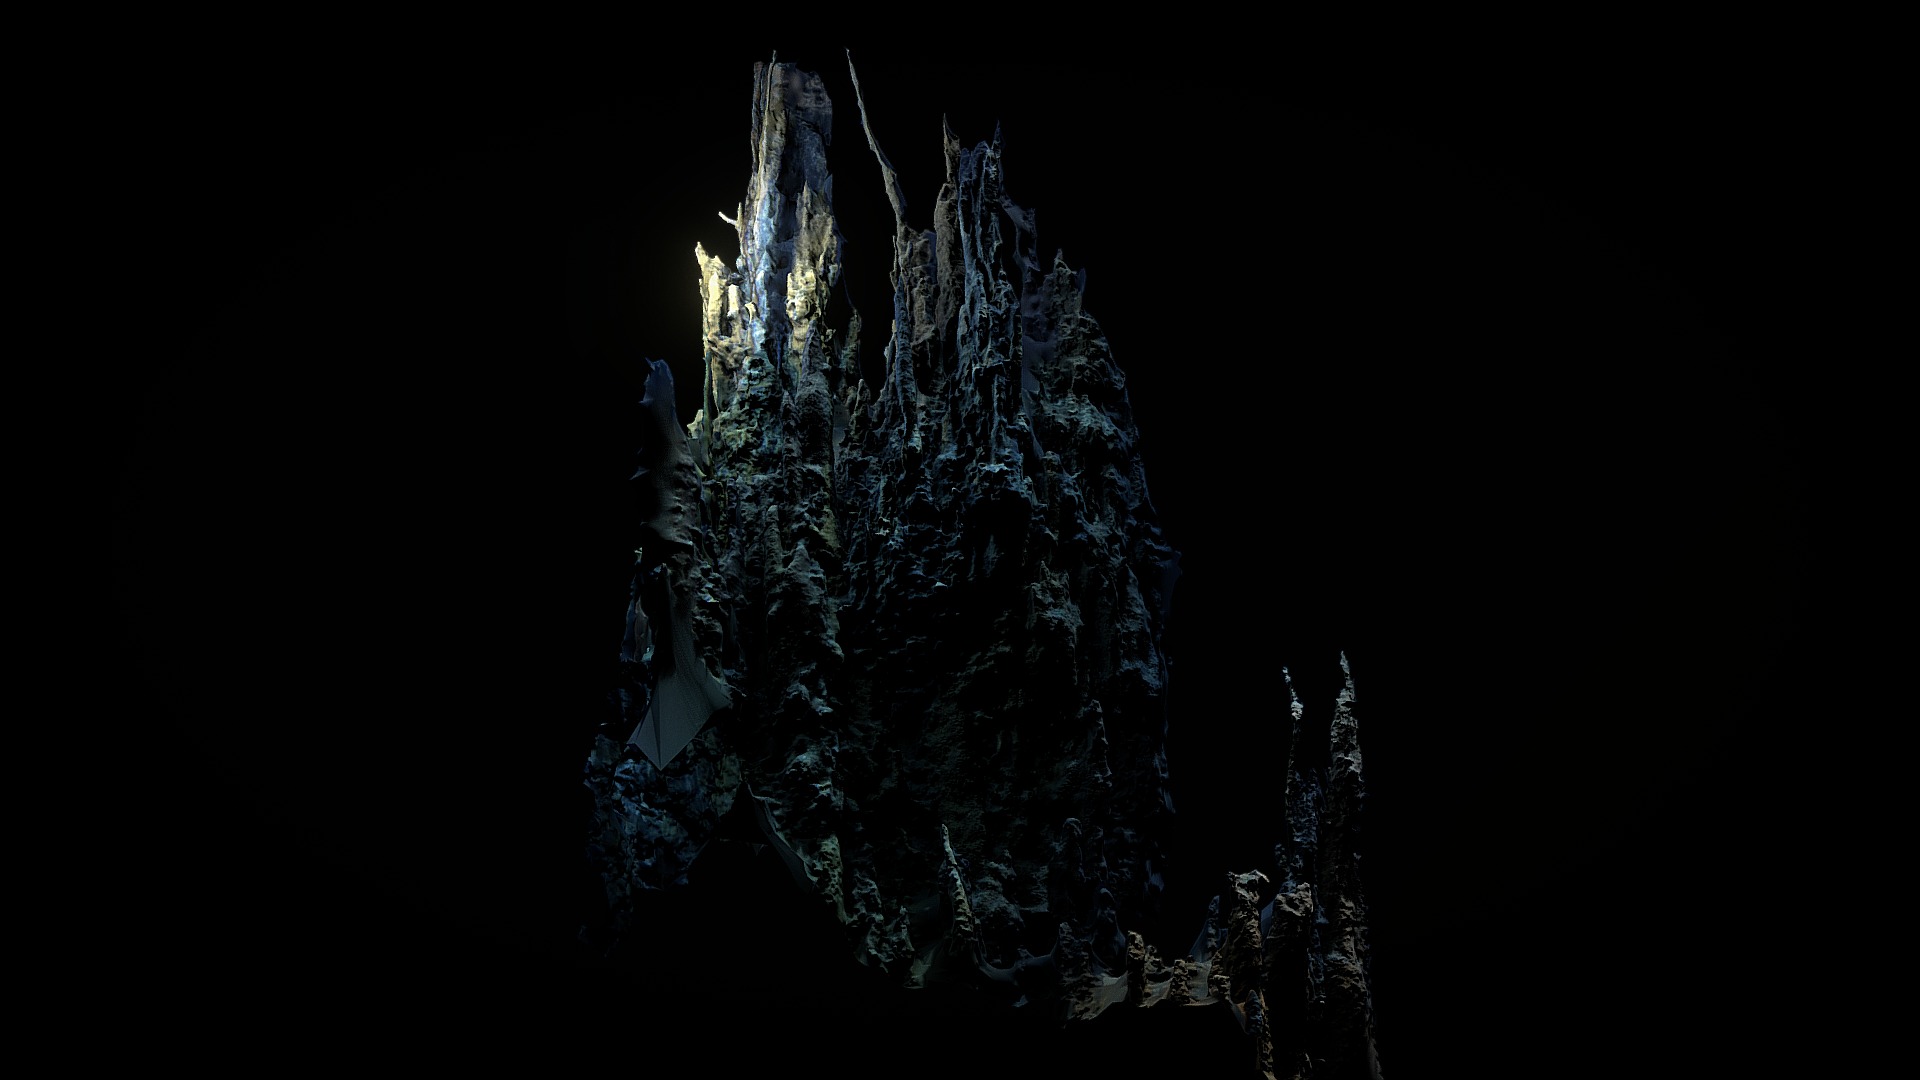 3D model Low Poly Deep Sea Hydrothermal Vent #4 - This is a 3D model of the Low Poly Deep Sea Hydrothermal Vent #4. The 3D model is about a tree with lights at night.